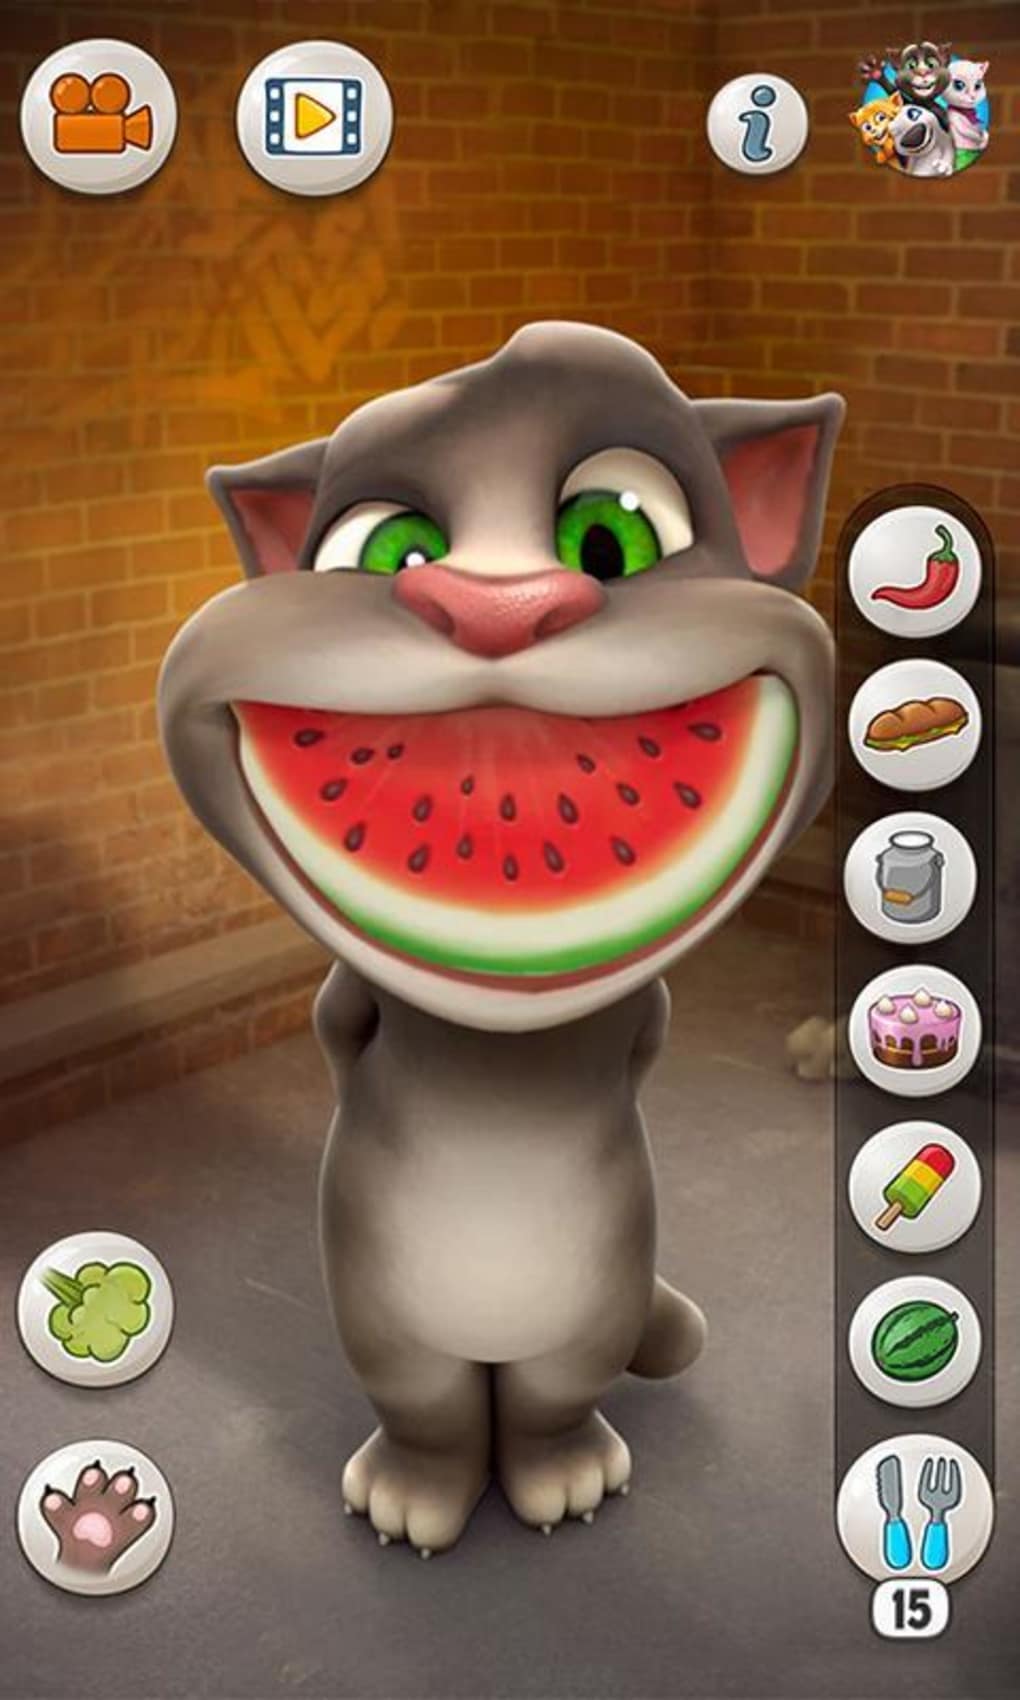 instal the last version for android Talking Juan Cat Simulation